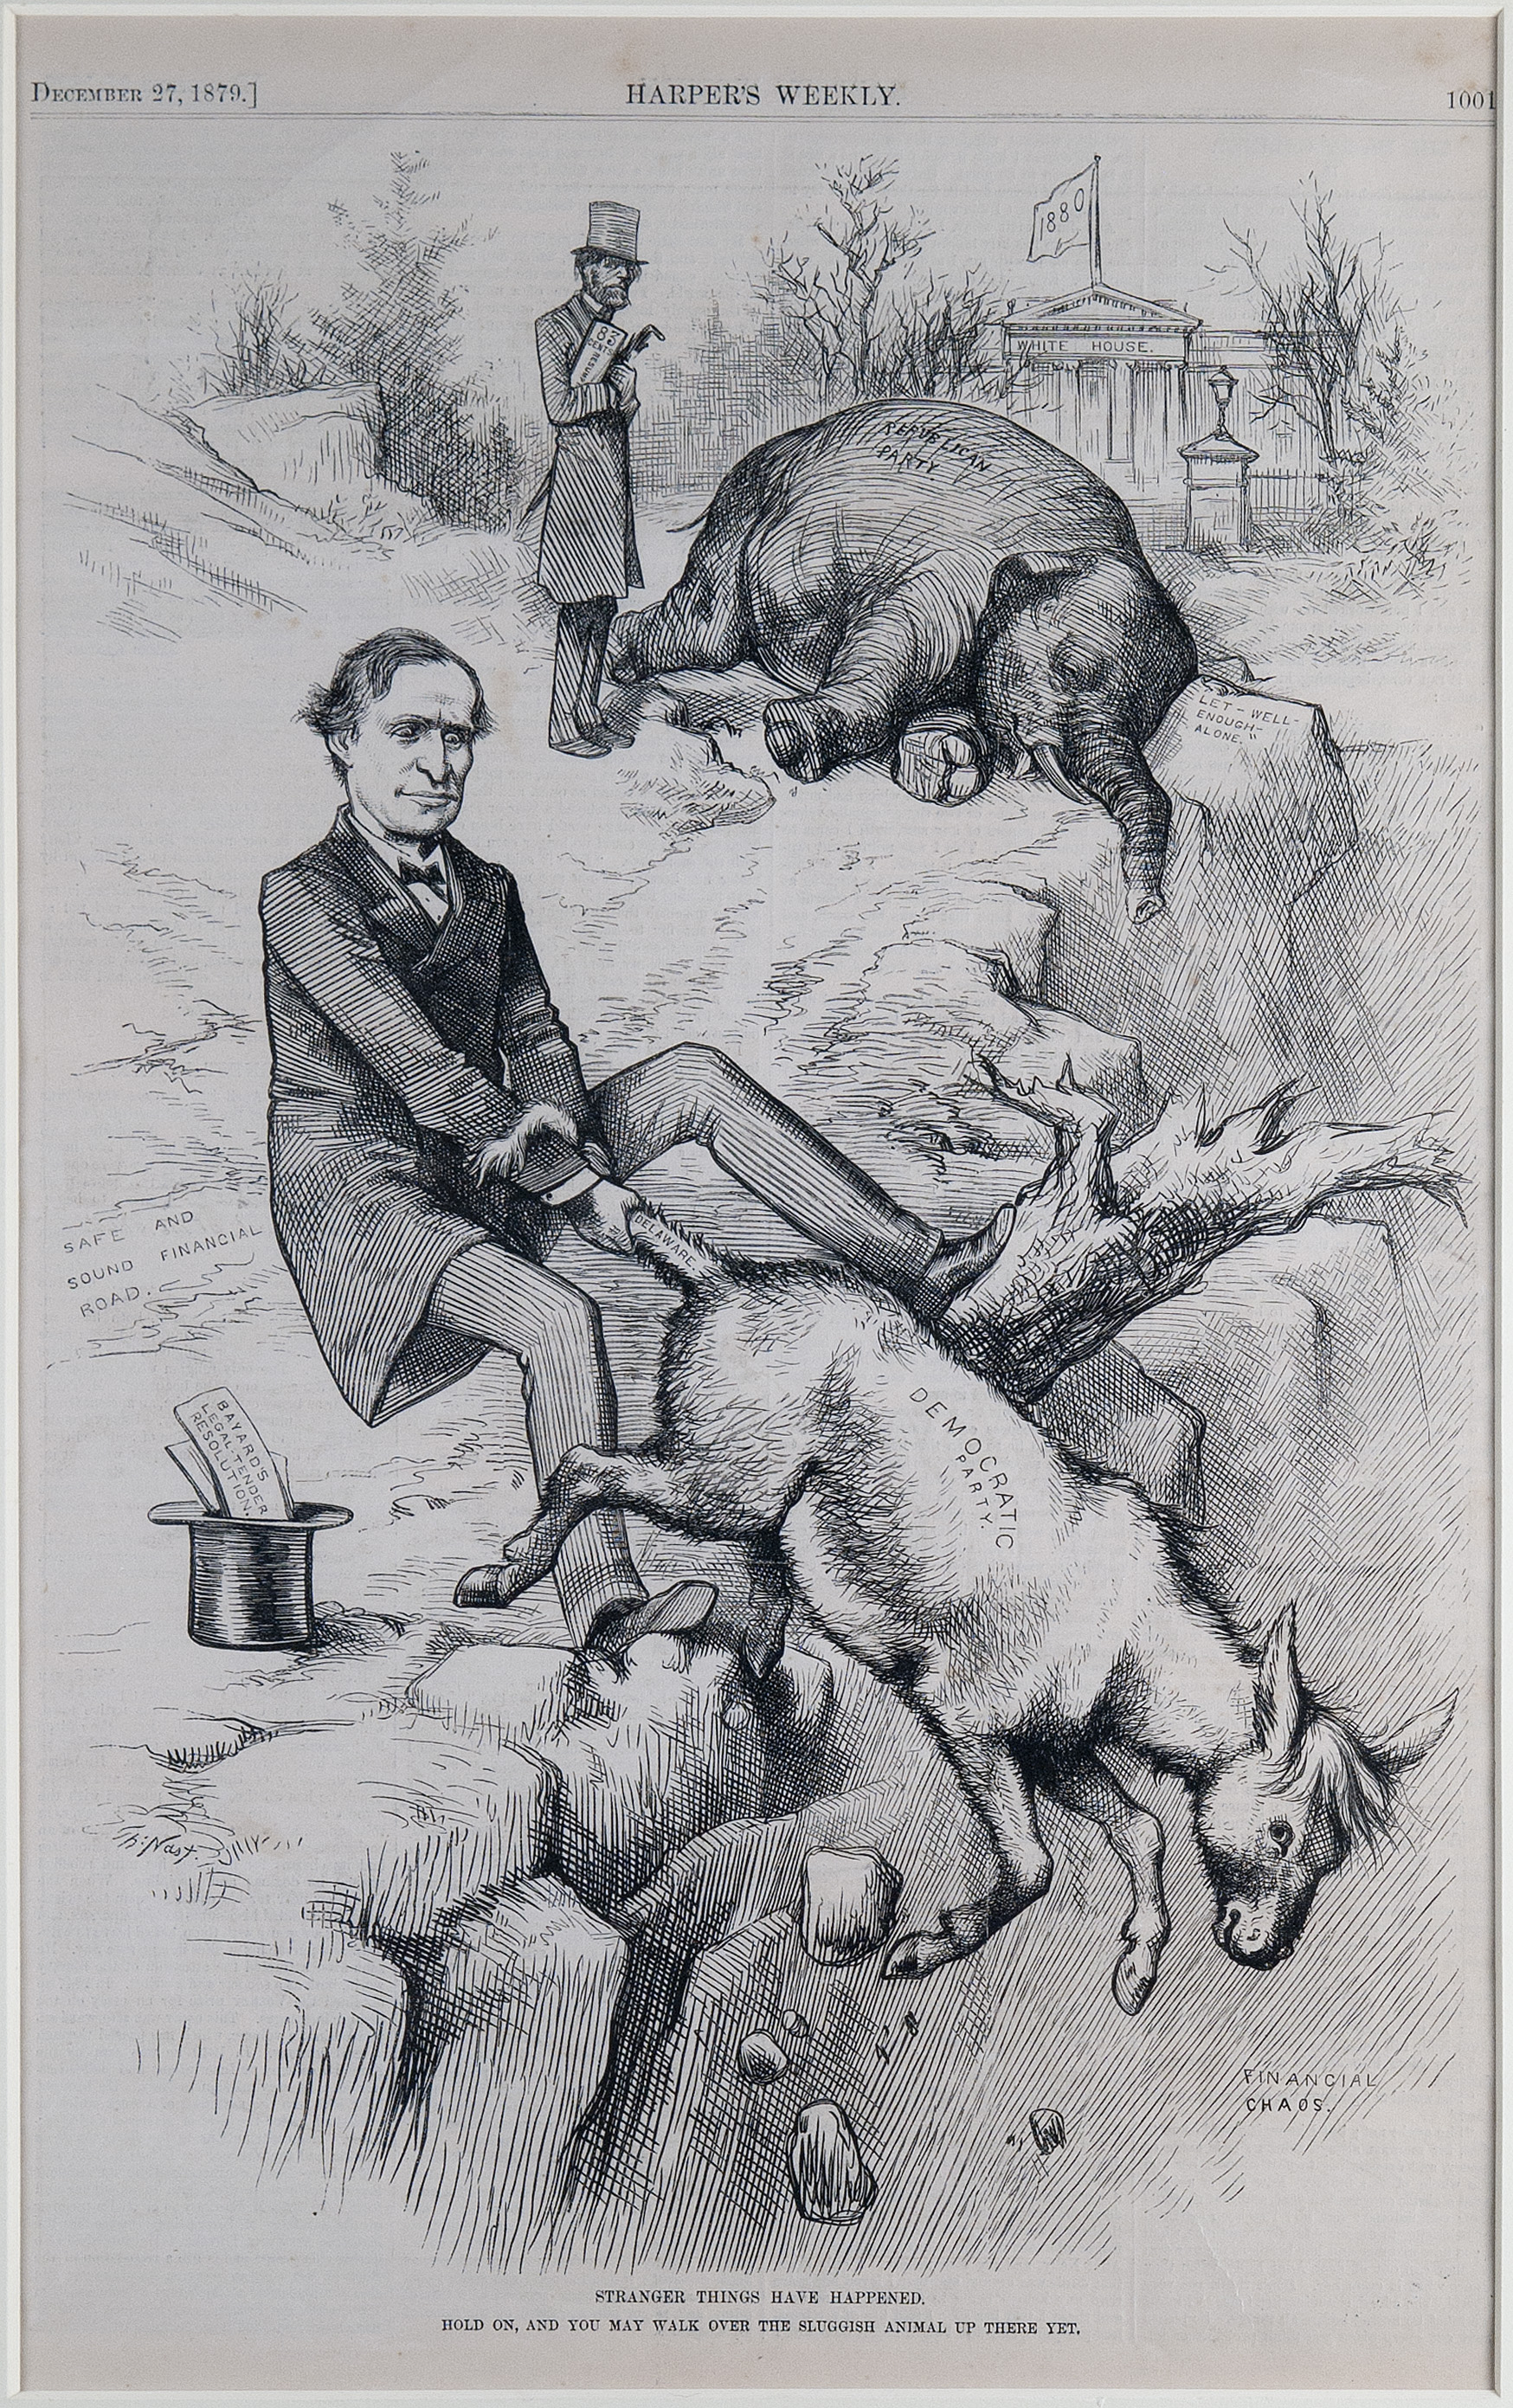 In "Stranger Things Can Happen," a determined Senator Thomas Bayard, right foot braced on a tree stump and left on a rock, pulls the Democratic Donkey by its tail away from a chasm of "financial chaos." In the background, Treasury Secretary John Sherman stands forlornly by the fallen Republican elephant, who is lying next to a boulder reading "Let Well Enough Alone." In the background is the White House, an 1880 flag flying overhead. This engraving Nast’s belief that the Deomcractic party could win the presidency in the 1880 run, a possible first since 1856. With Bayard’s Legal-Tender Resolution, the Democratic party could lead the U.S. onto the “Safe and Sound Financial Road.”